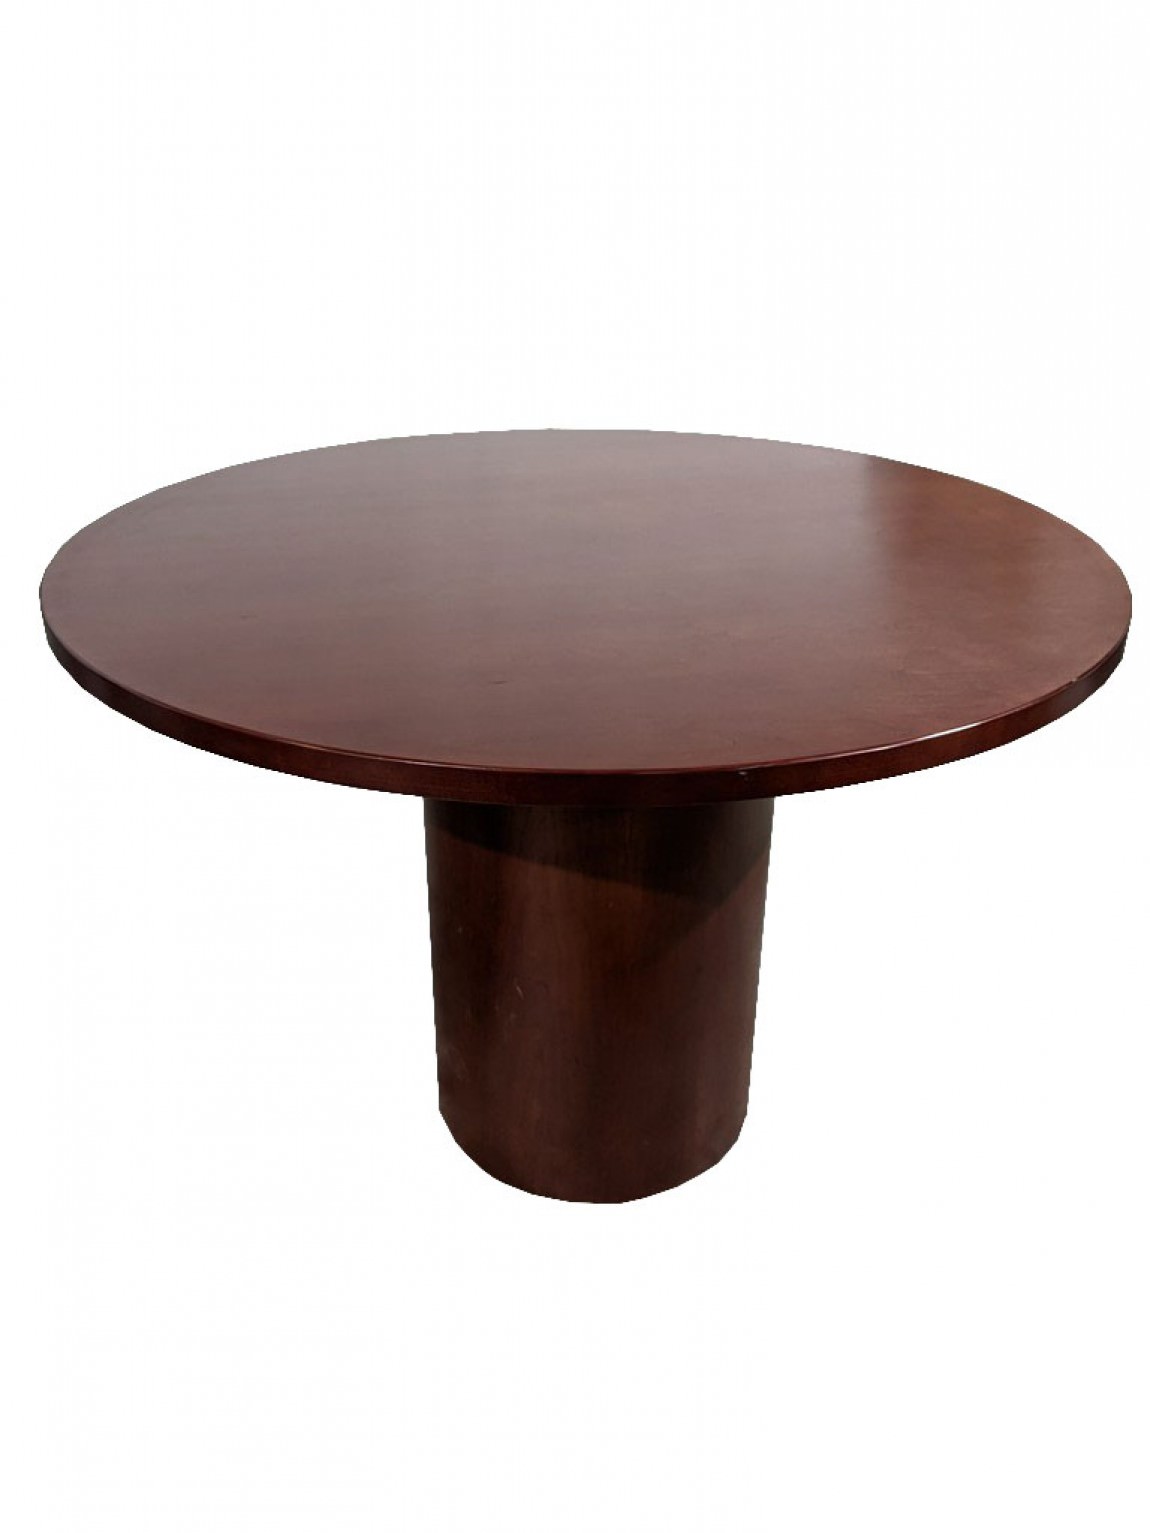 42” Round Solid Wood Mahogany Conference Meeting Table